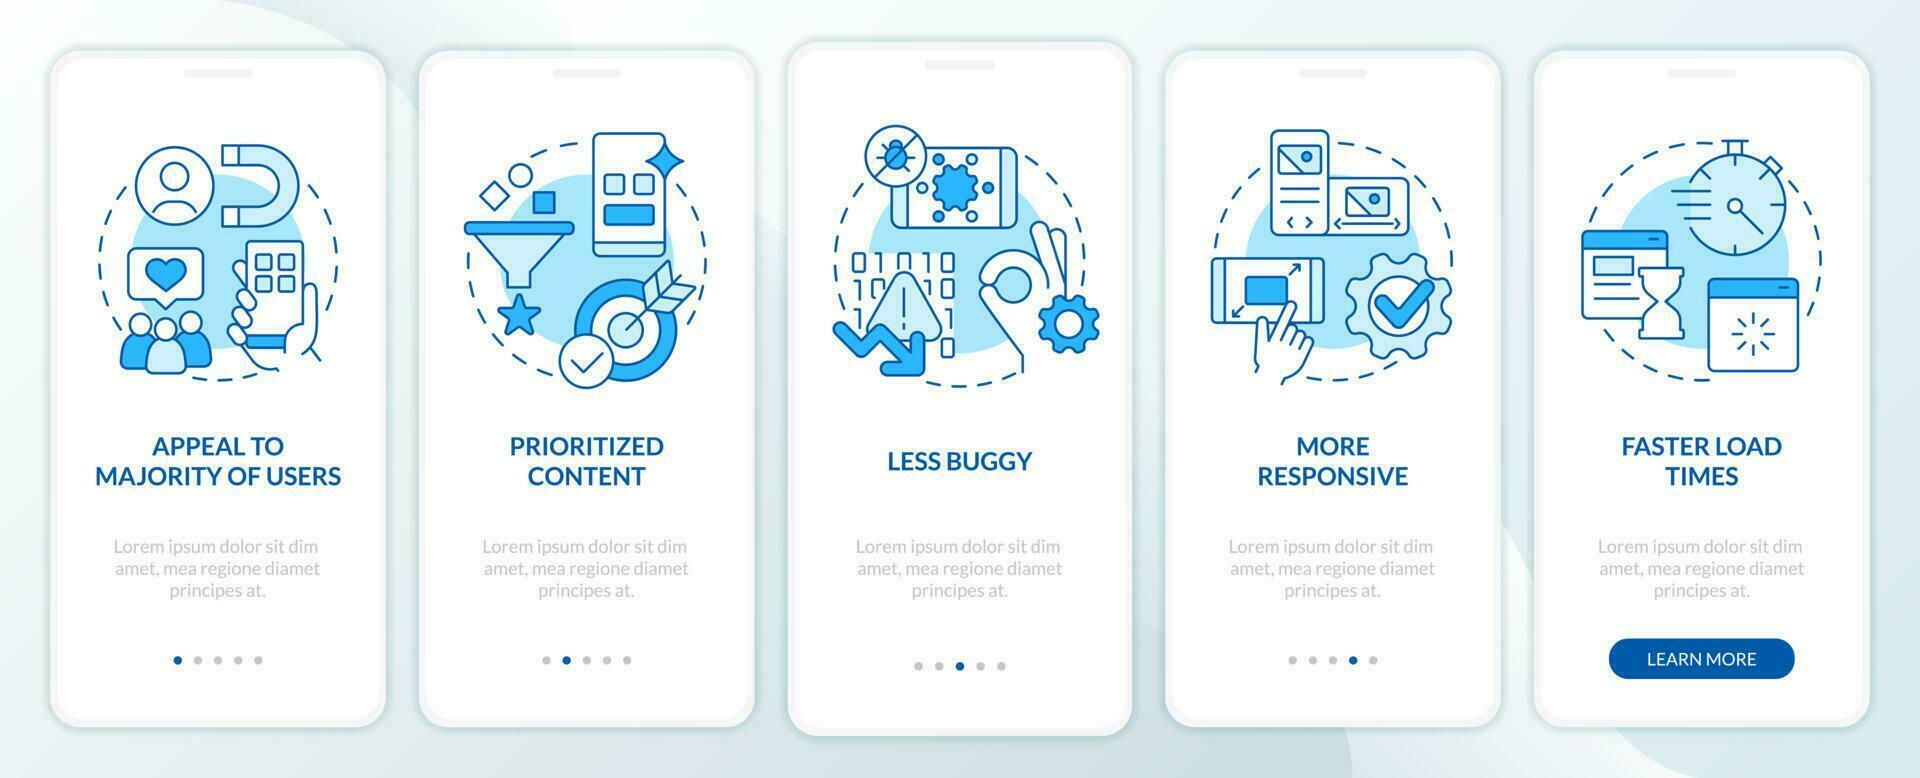 Advantages of mobile first design blue onboarding mobile app screen. Walkthrough 5 steps editable graphic instructions with linear concepts. UI, UX, GUI template vector